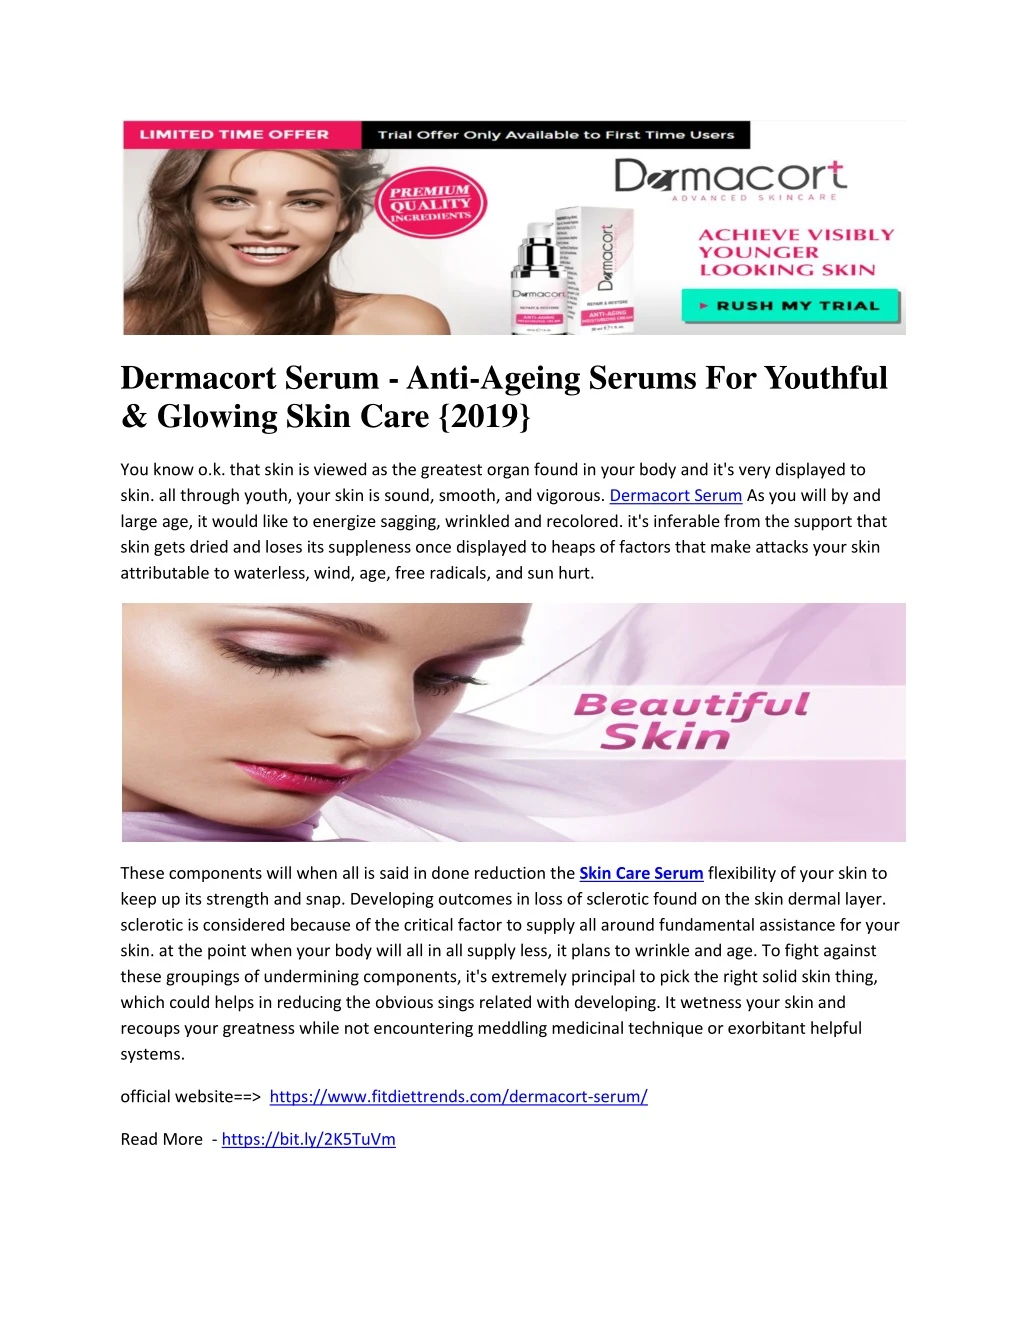 dermacort serum anti ageing serums for youthful